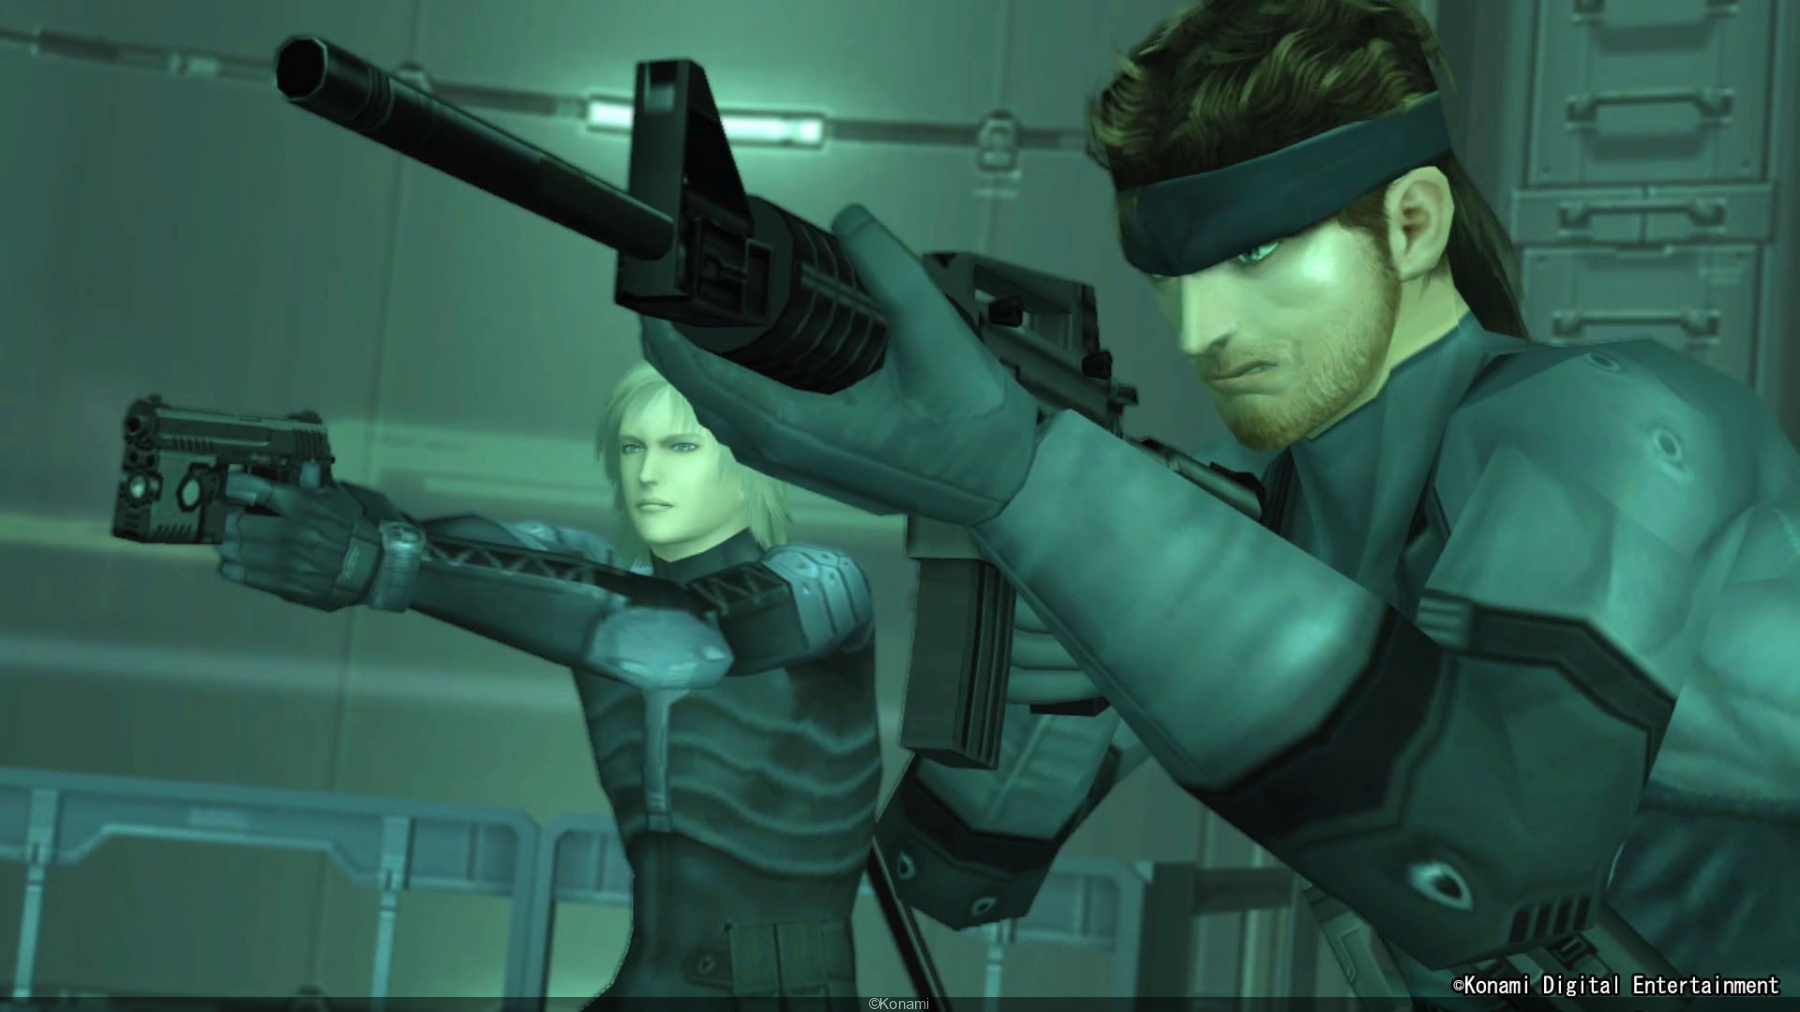 Tamatem Games  Metal Gear Solid: The Master Collection Vol. 1 is a  Disappointment and Here's Why - Tamatem Games